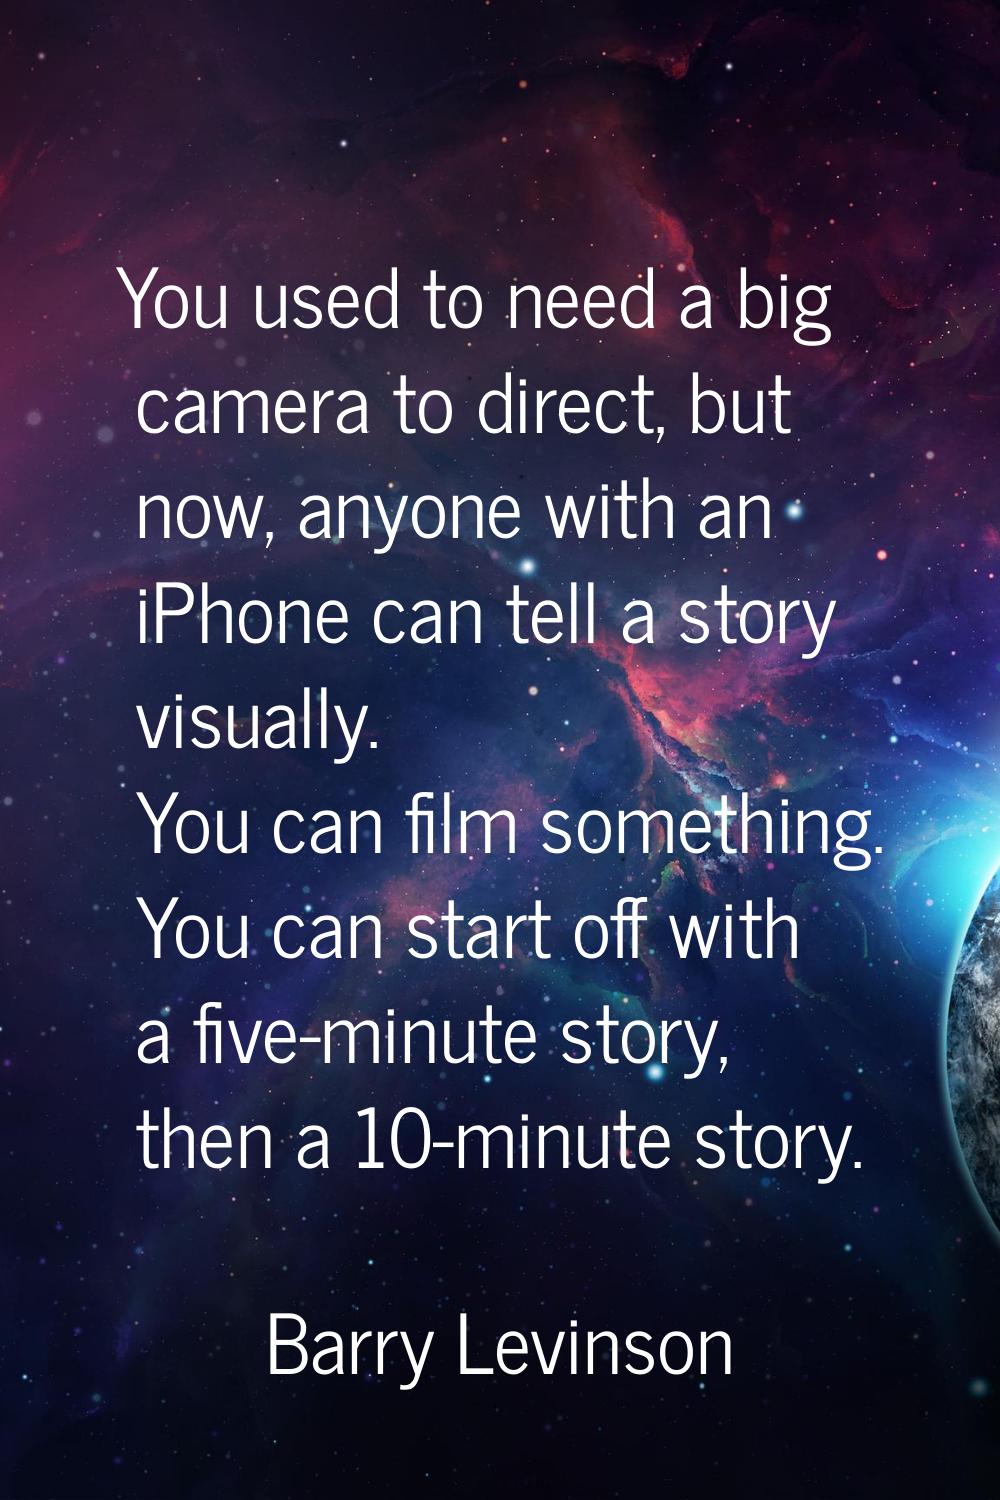 You used to need a big camera to direct, but now, anyone with an iPhone can tell a story visually. 